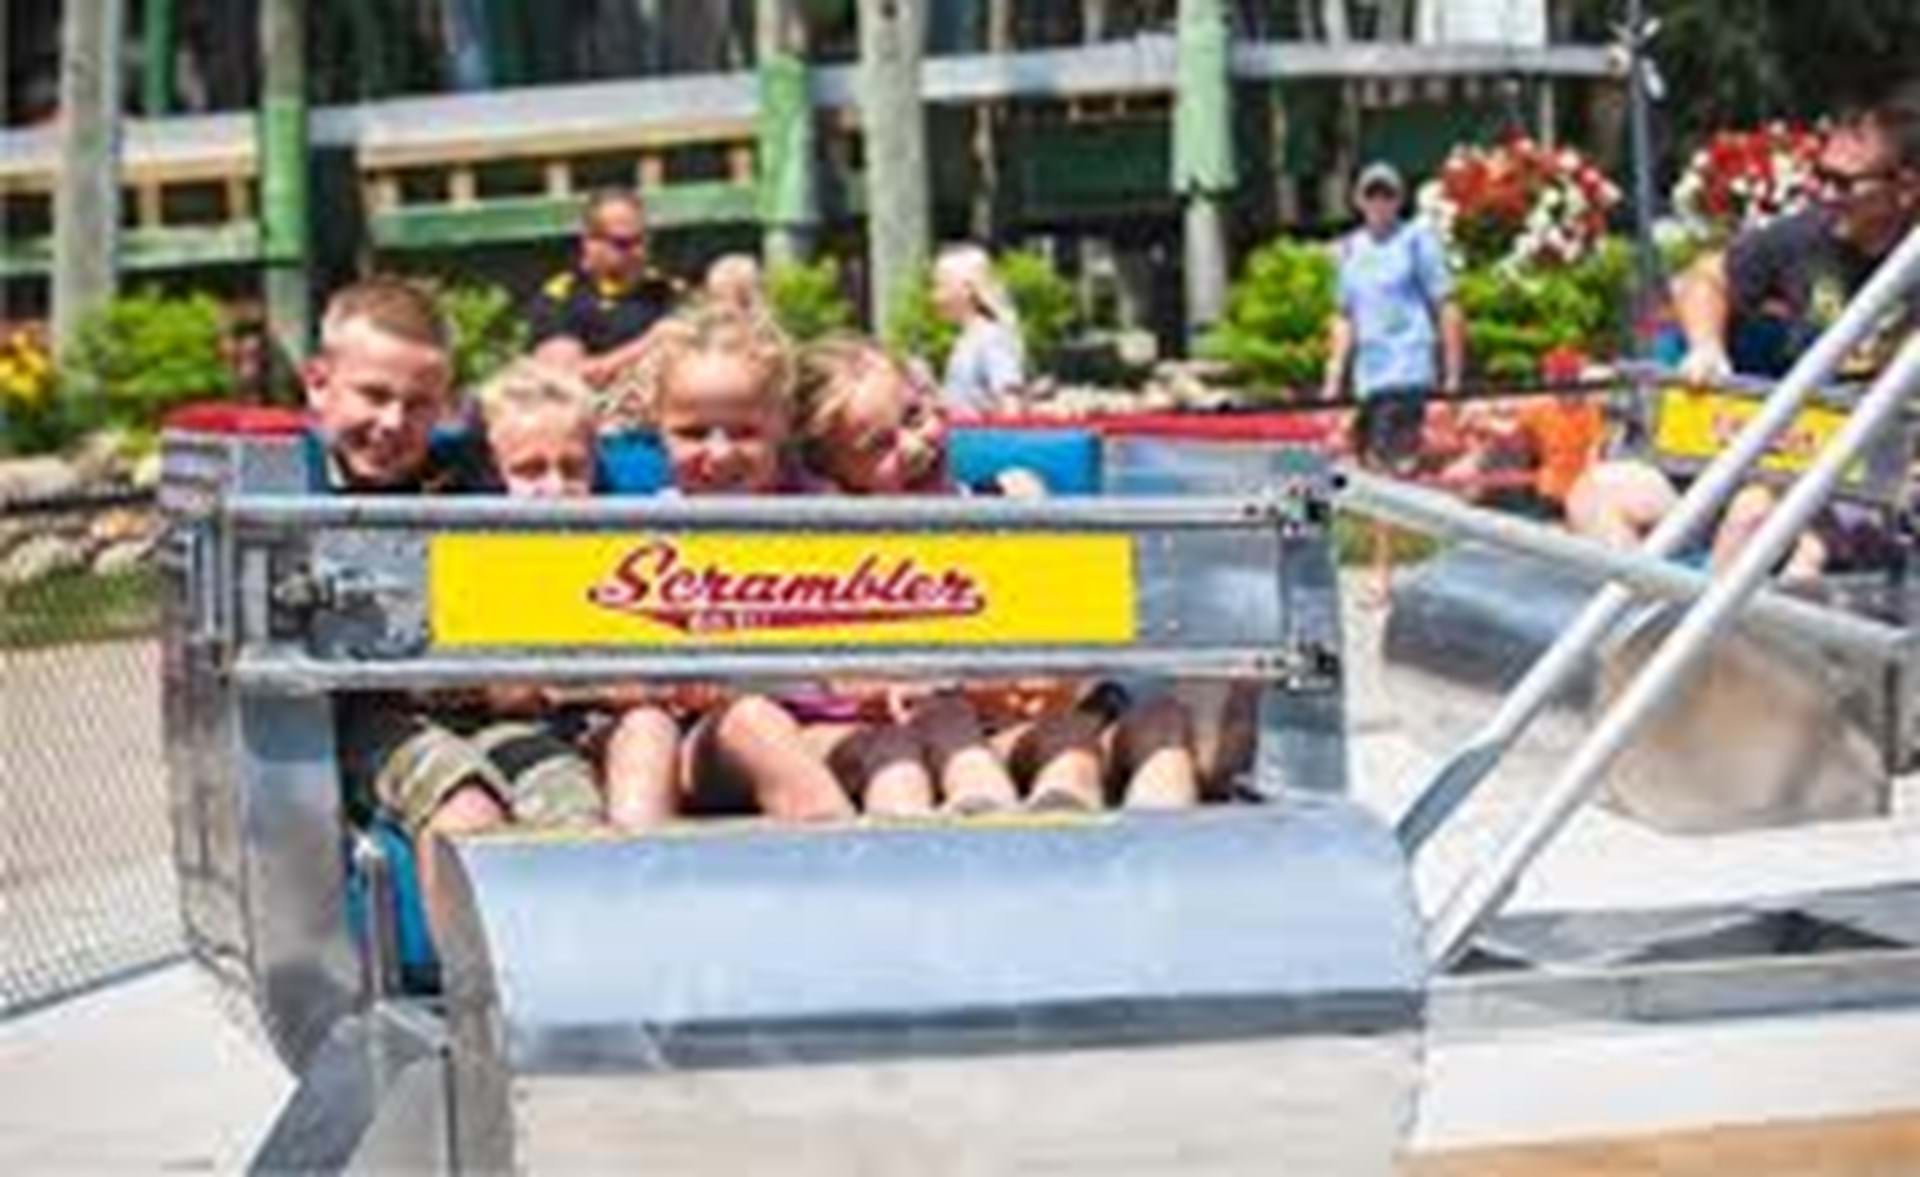 The well-known Scrambler ride